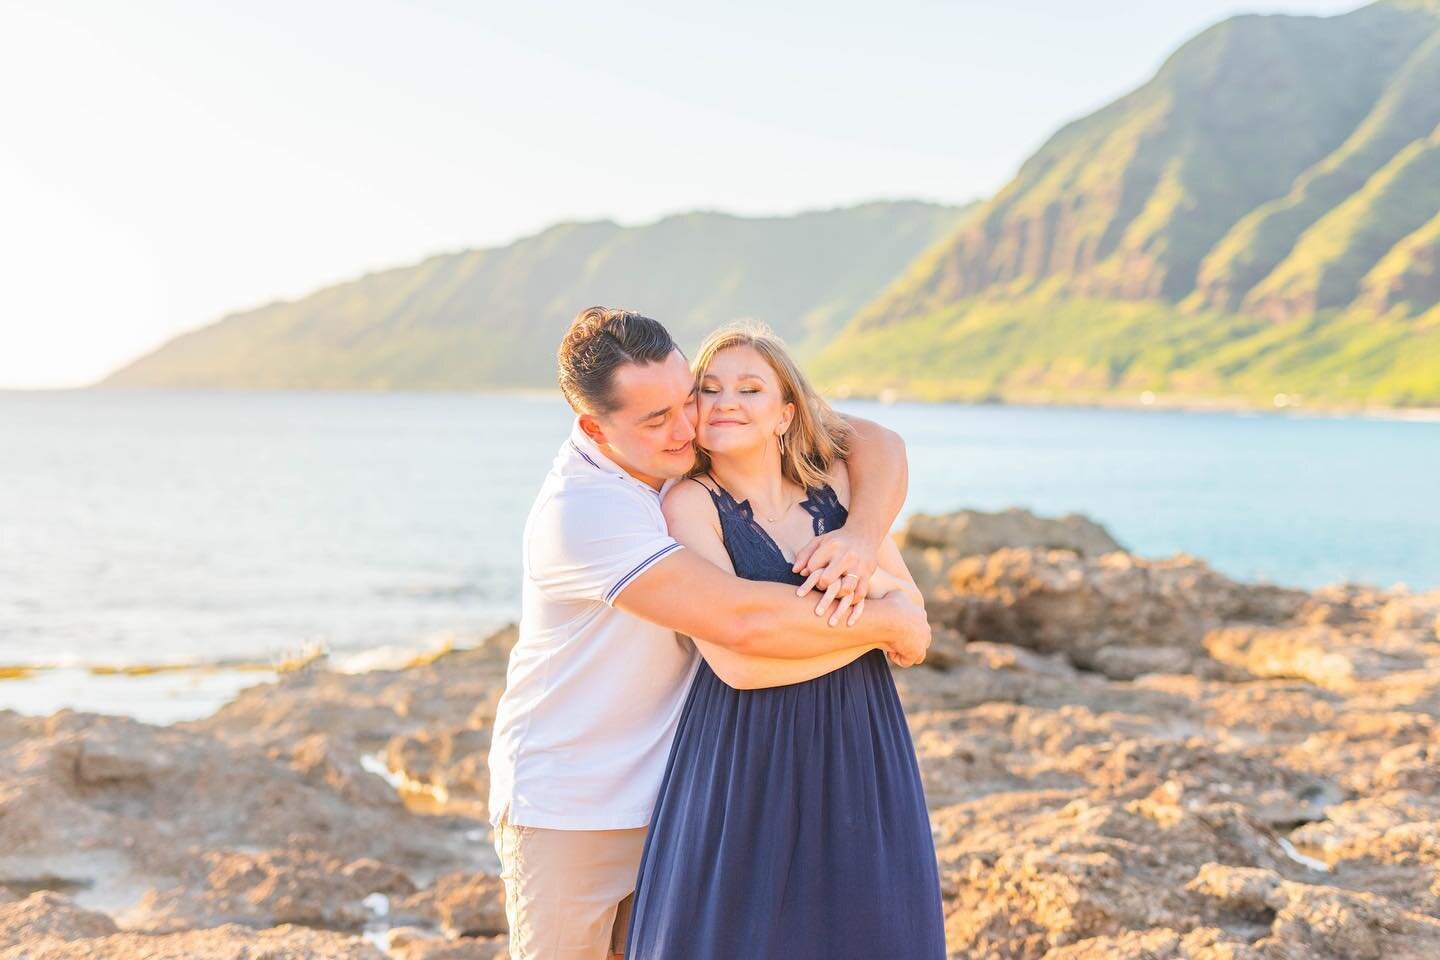 The green mountains that the winter rains bring to the west side are stunning and so are these two together! 🥹❤️🌿

#oahucouplesphotographer #oahuhoneymoonphotographer #oahufamilyphotographer #oahumaternityphotographer #oahuhoneymoon #oahuhoneymoonp